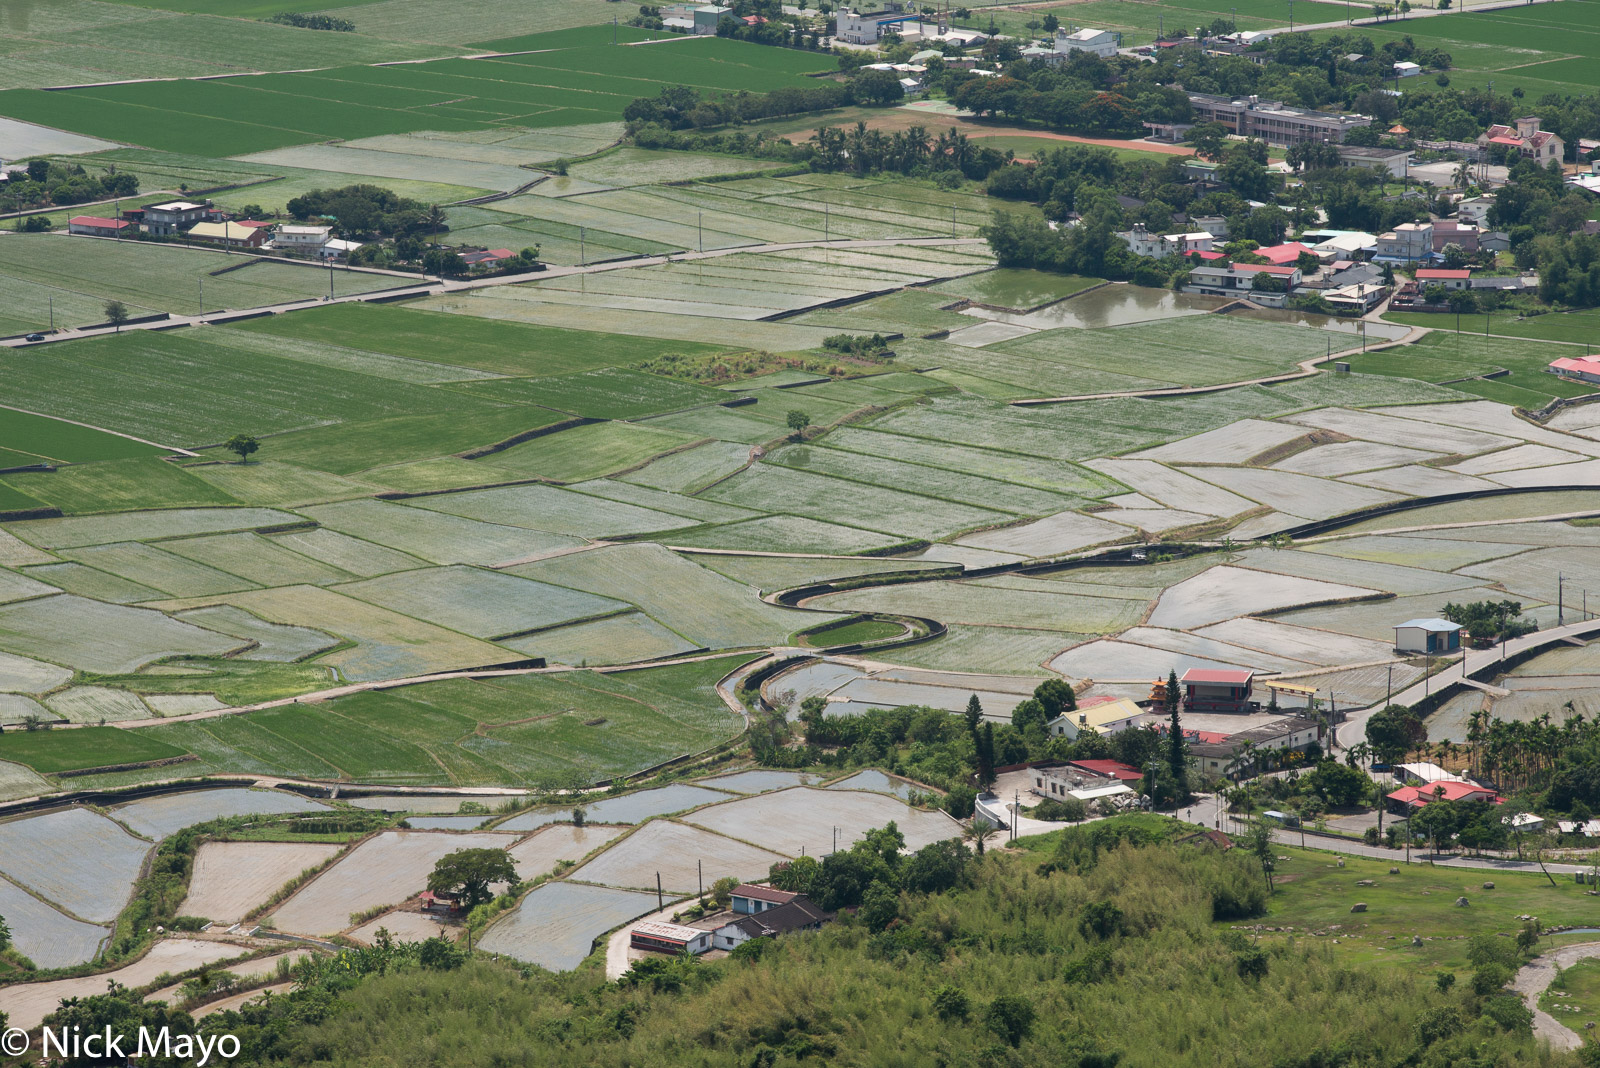 A school and village amongst the paddy fields as viewed from Liushidanshan.